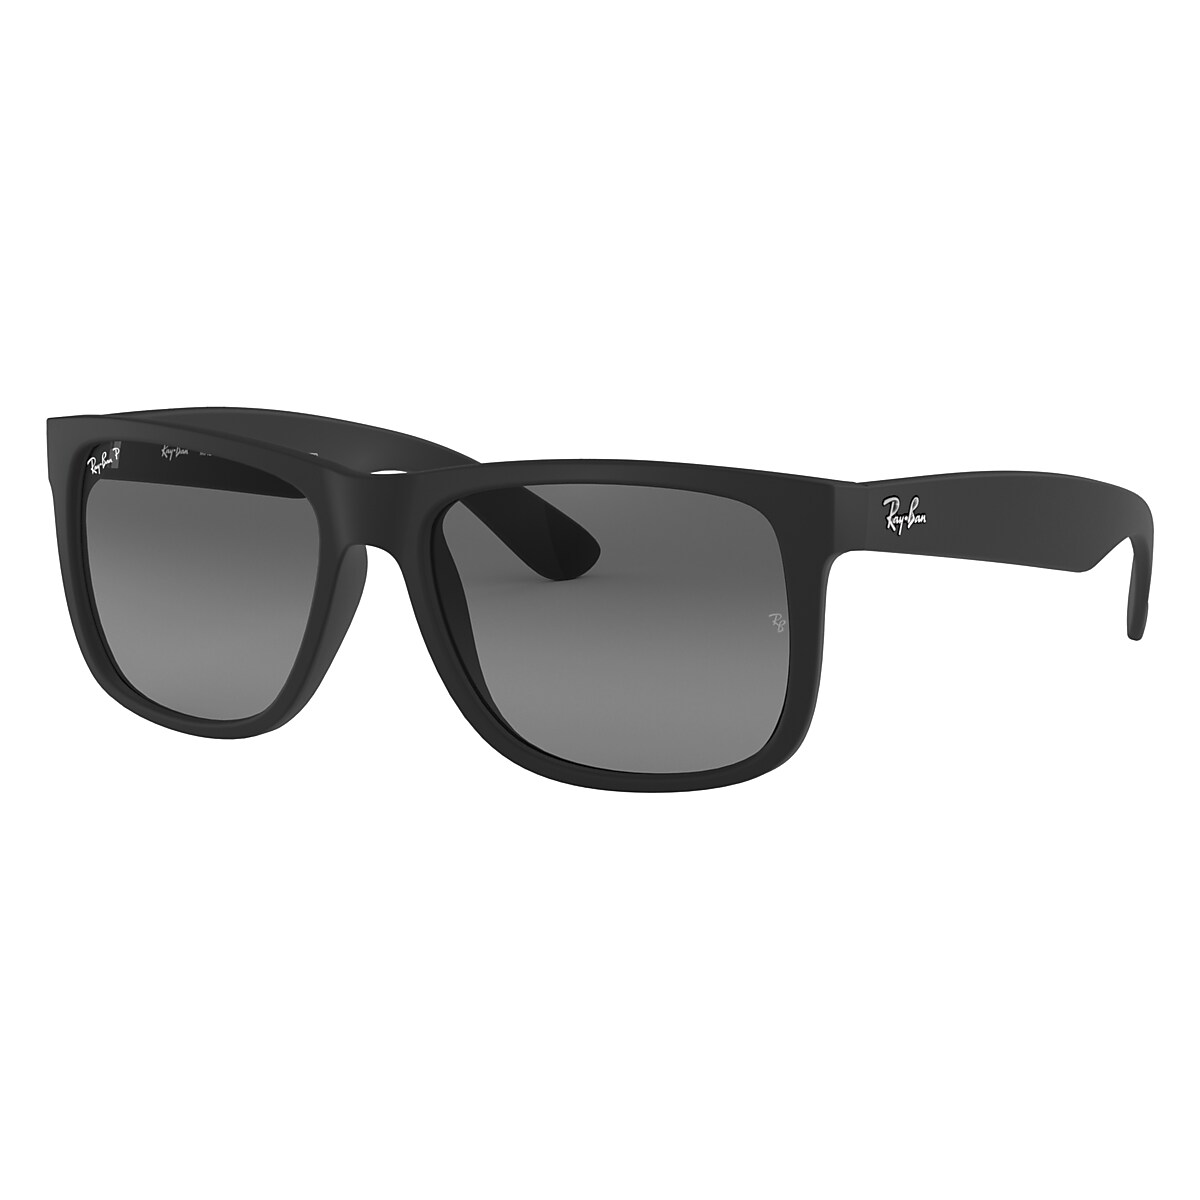 Melodramatisch Bij prieel Justin Classic Sunglasses in Black and Light Grey - RB4165 | Ray-Ban® US